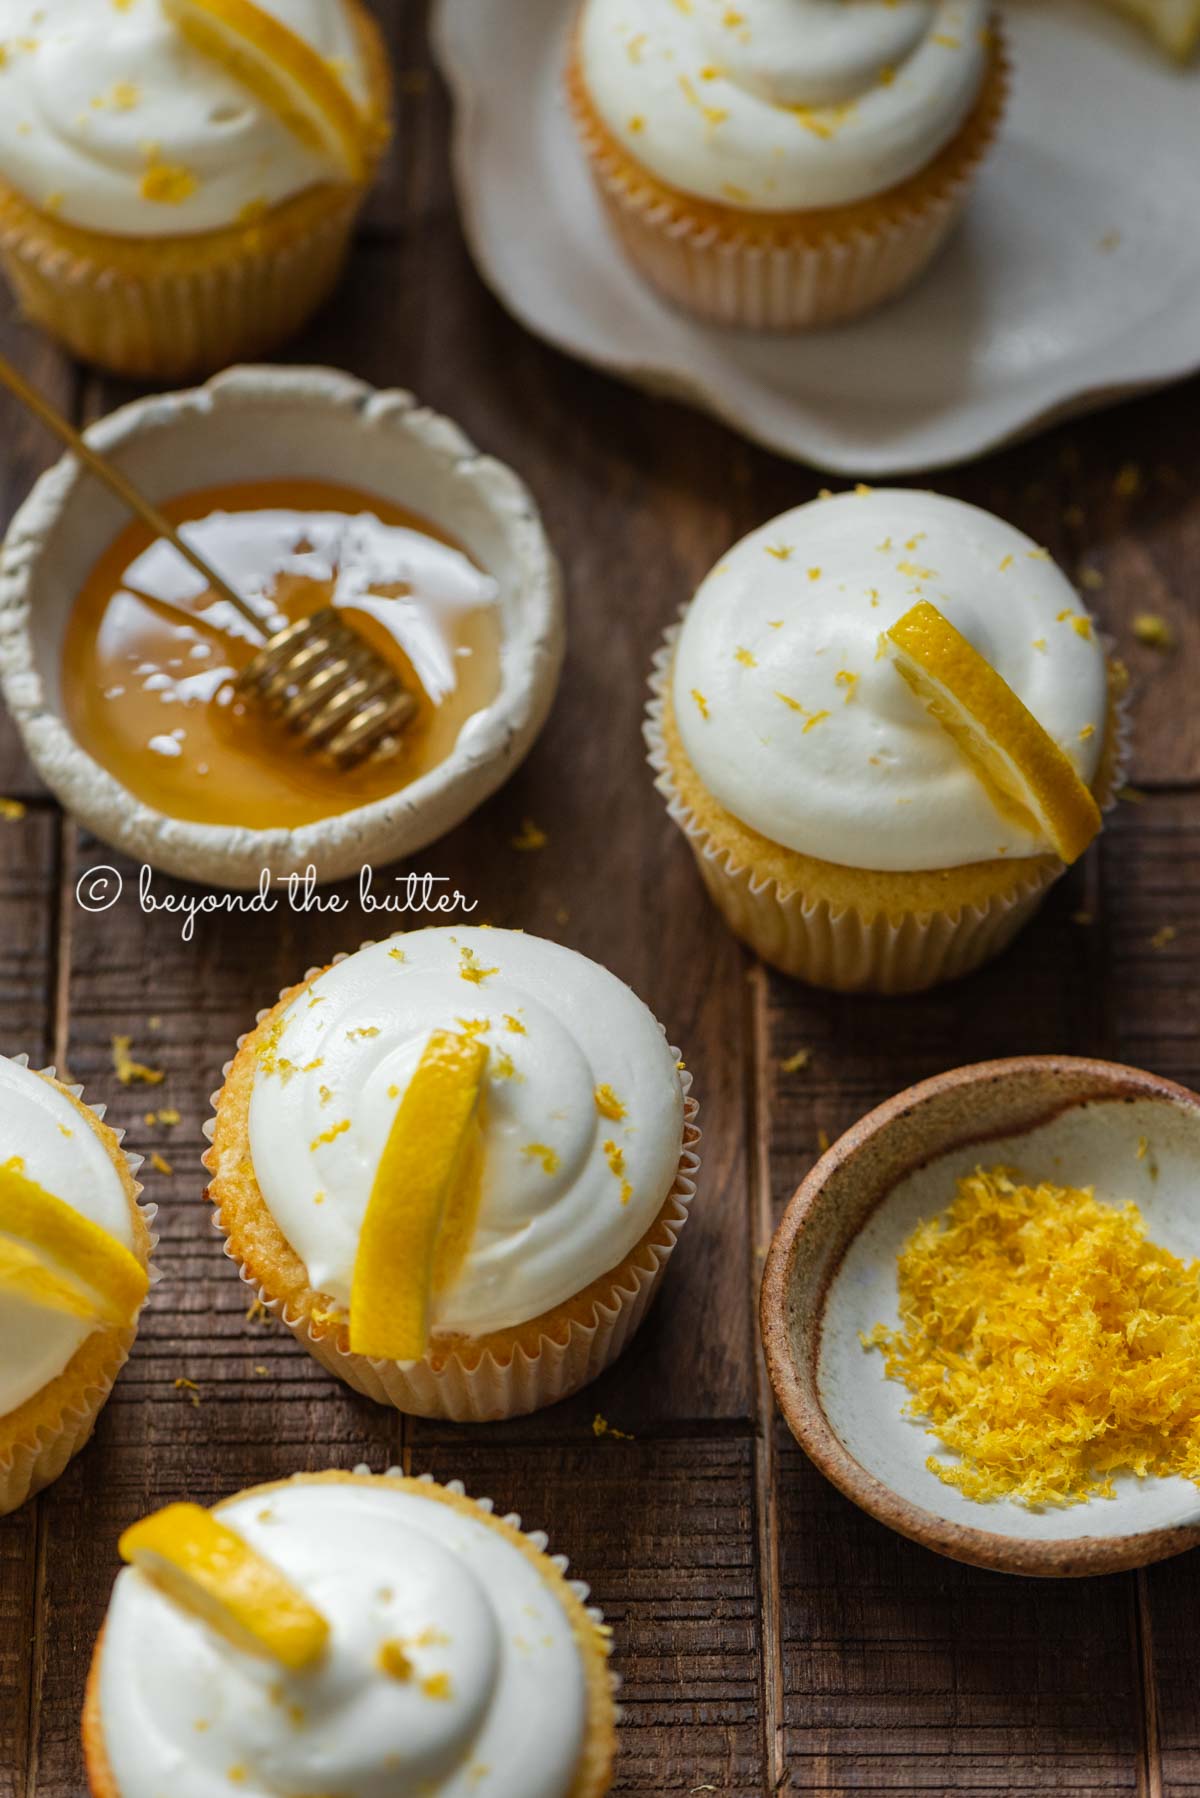 Randomly placed lemon cupcakes with a small bowl of honey and small bowl of lemon zest on a dark wood background | All Images © Beyond the Butter®